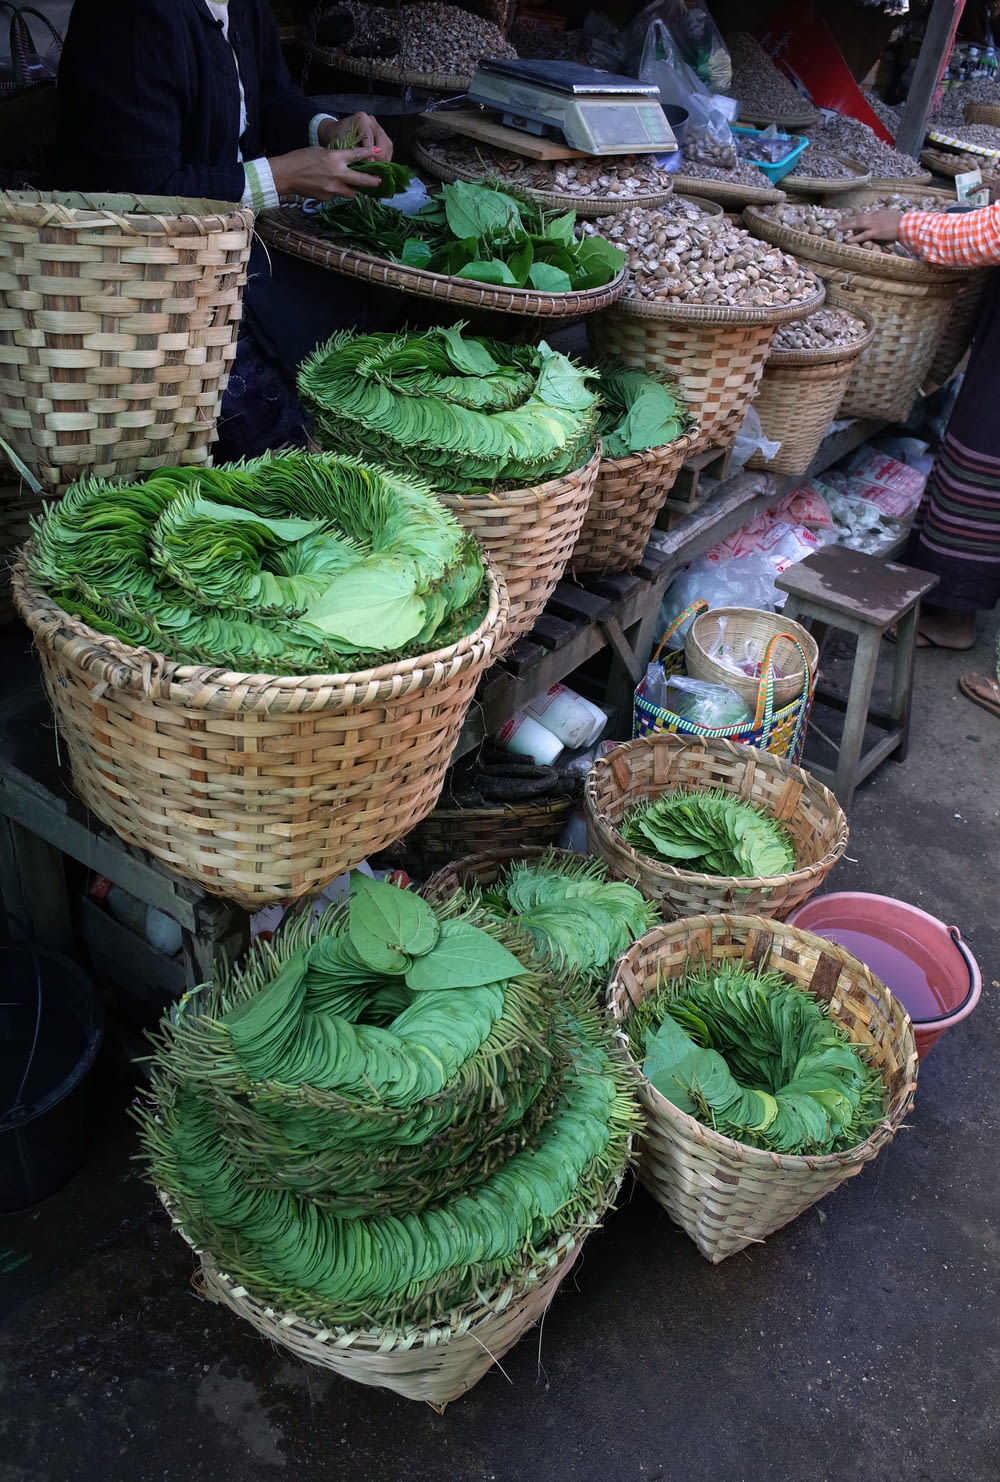 a group of baskets full of vegetables